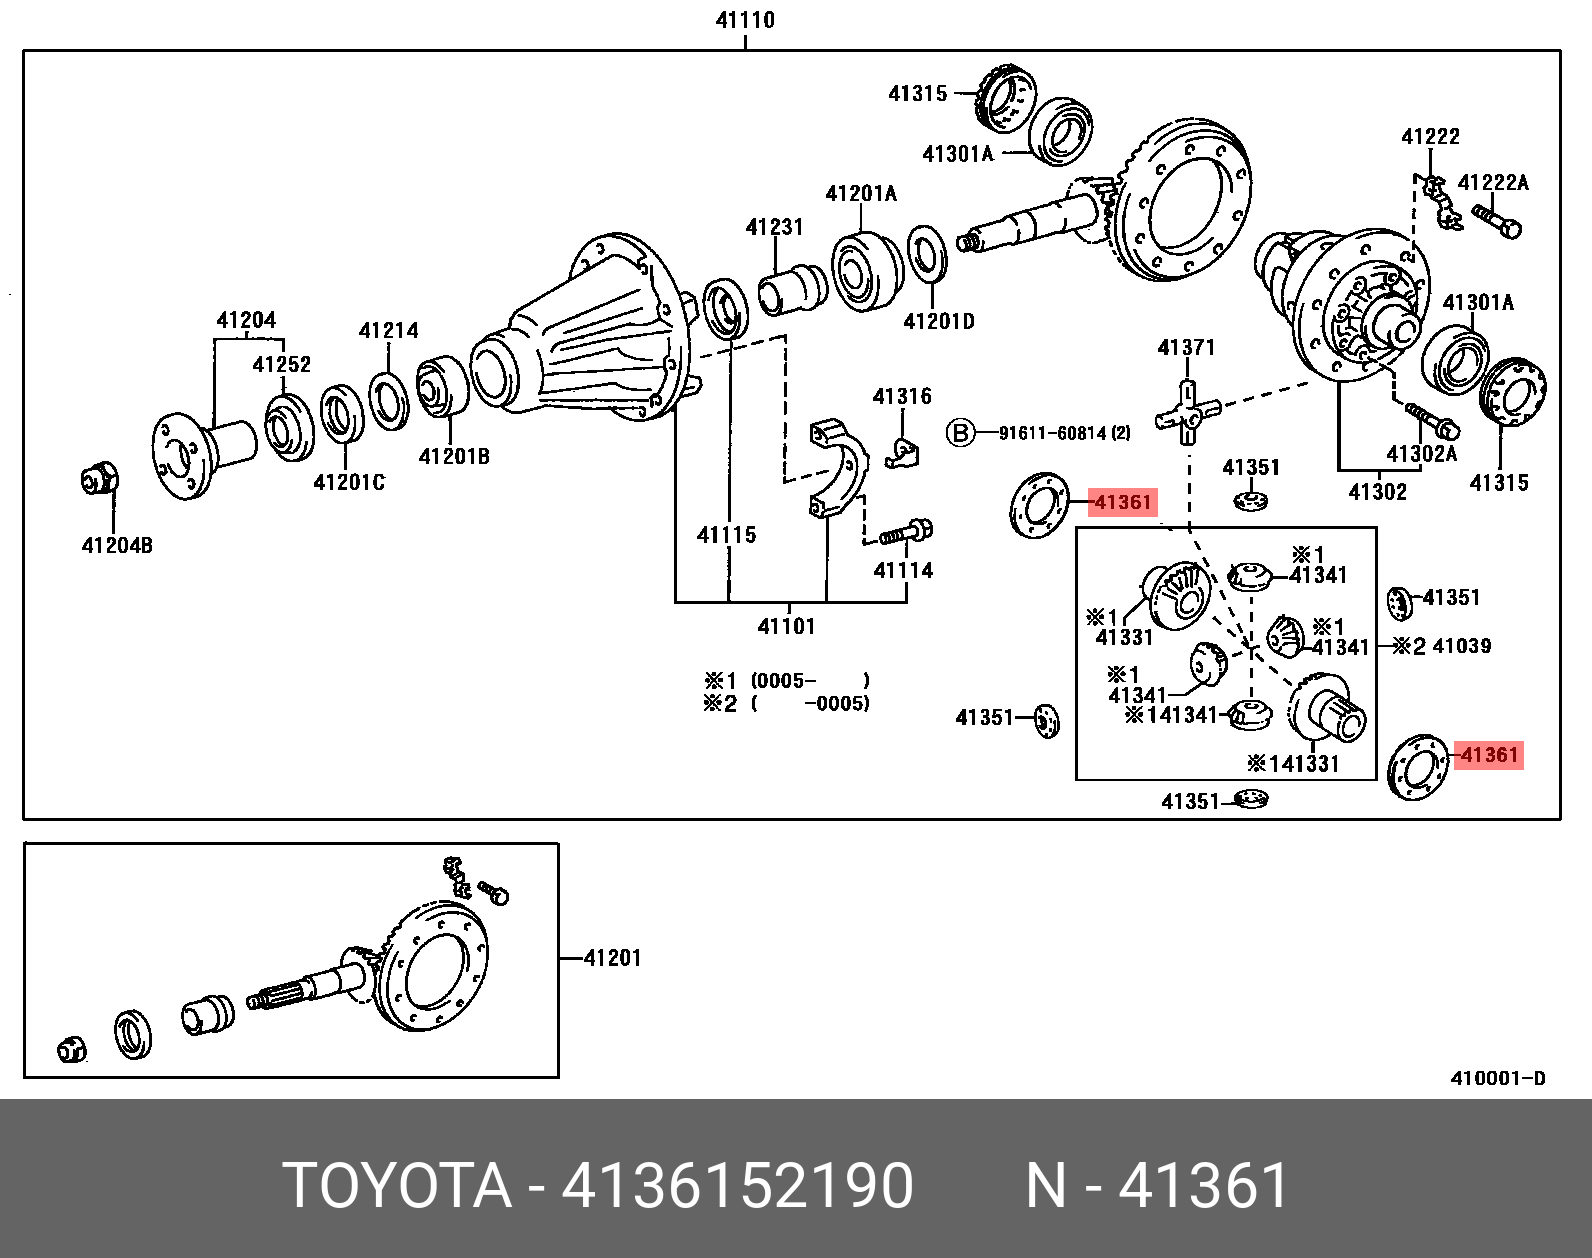 4136152190, YARIS 202002-, KSP210, MXPA1#, MXPH1#, WASHER, REAR DIFFERENTIAL SIDE GEAR THRUST, NO.1